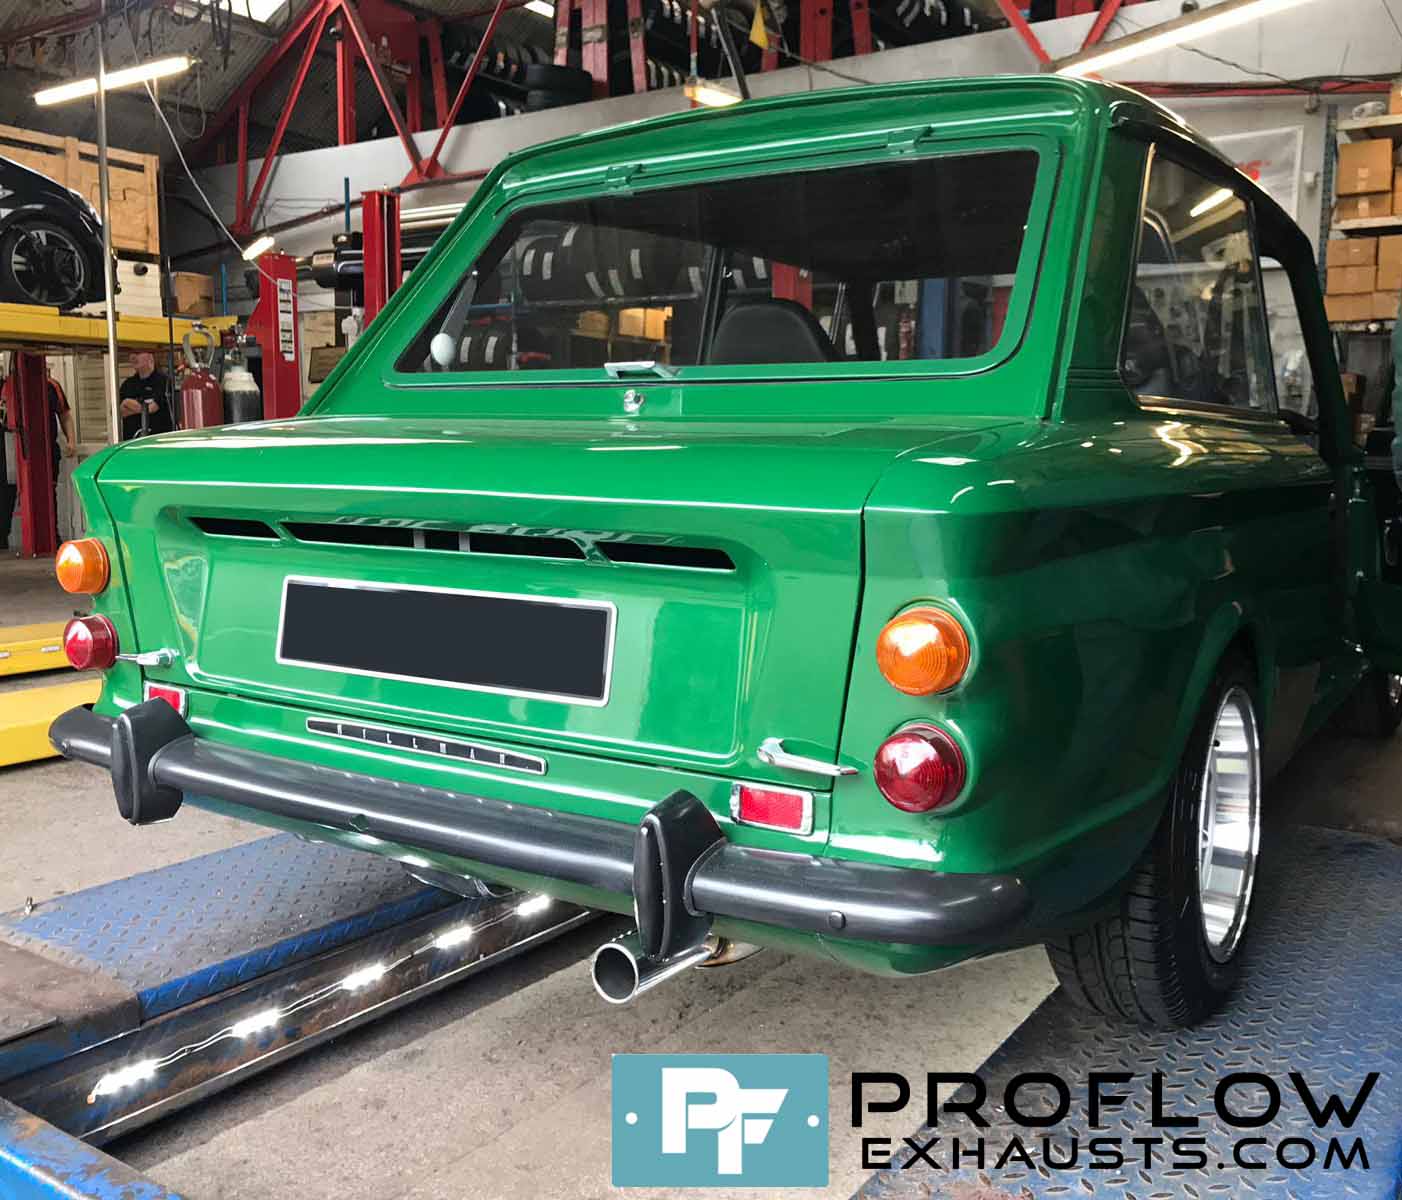 Proflow Exhausts Custom Built Specialised Back Box For Hillman Imp (3)